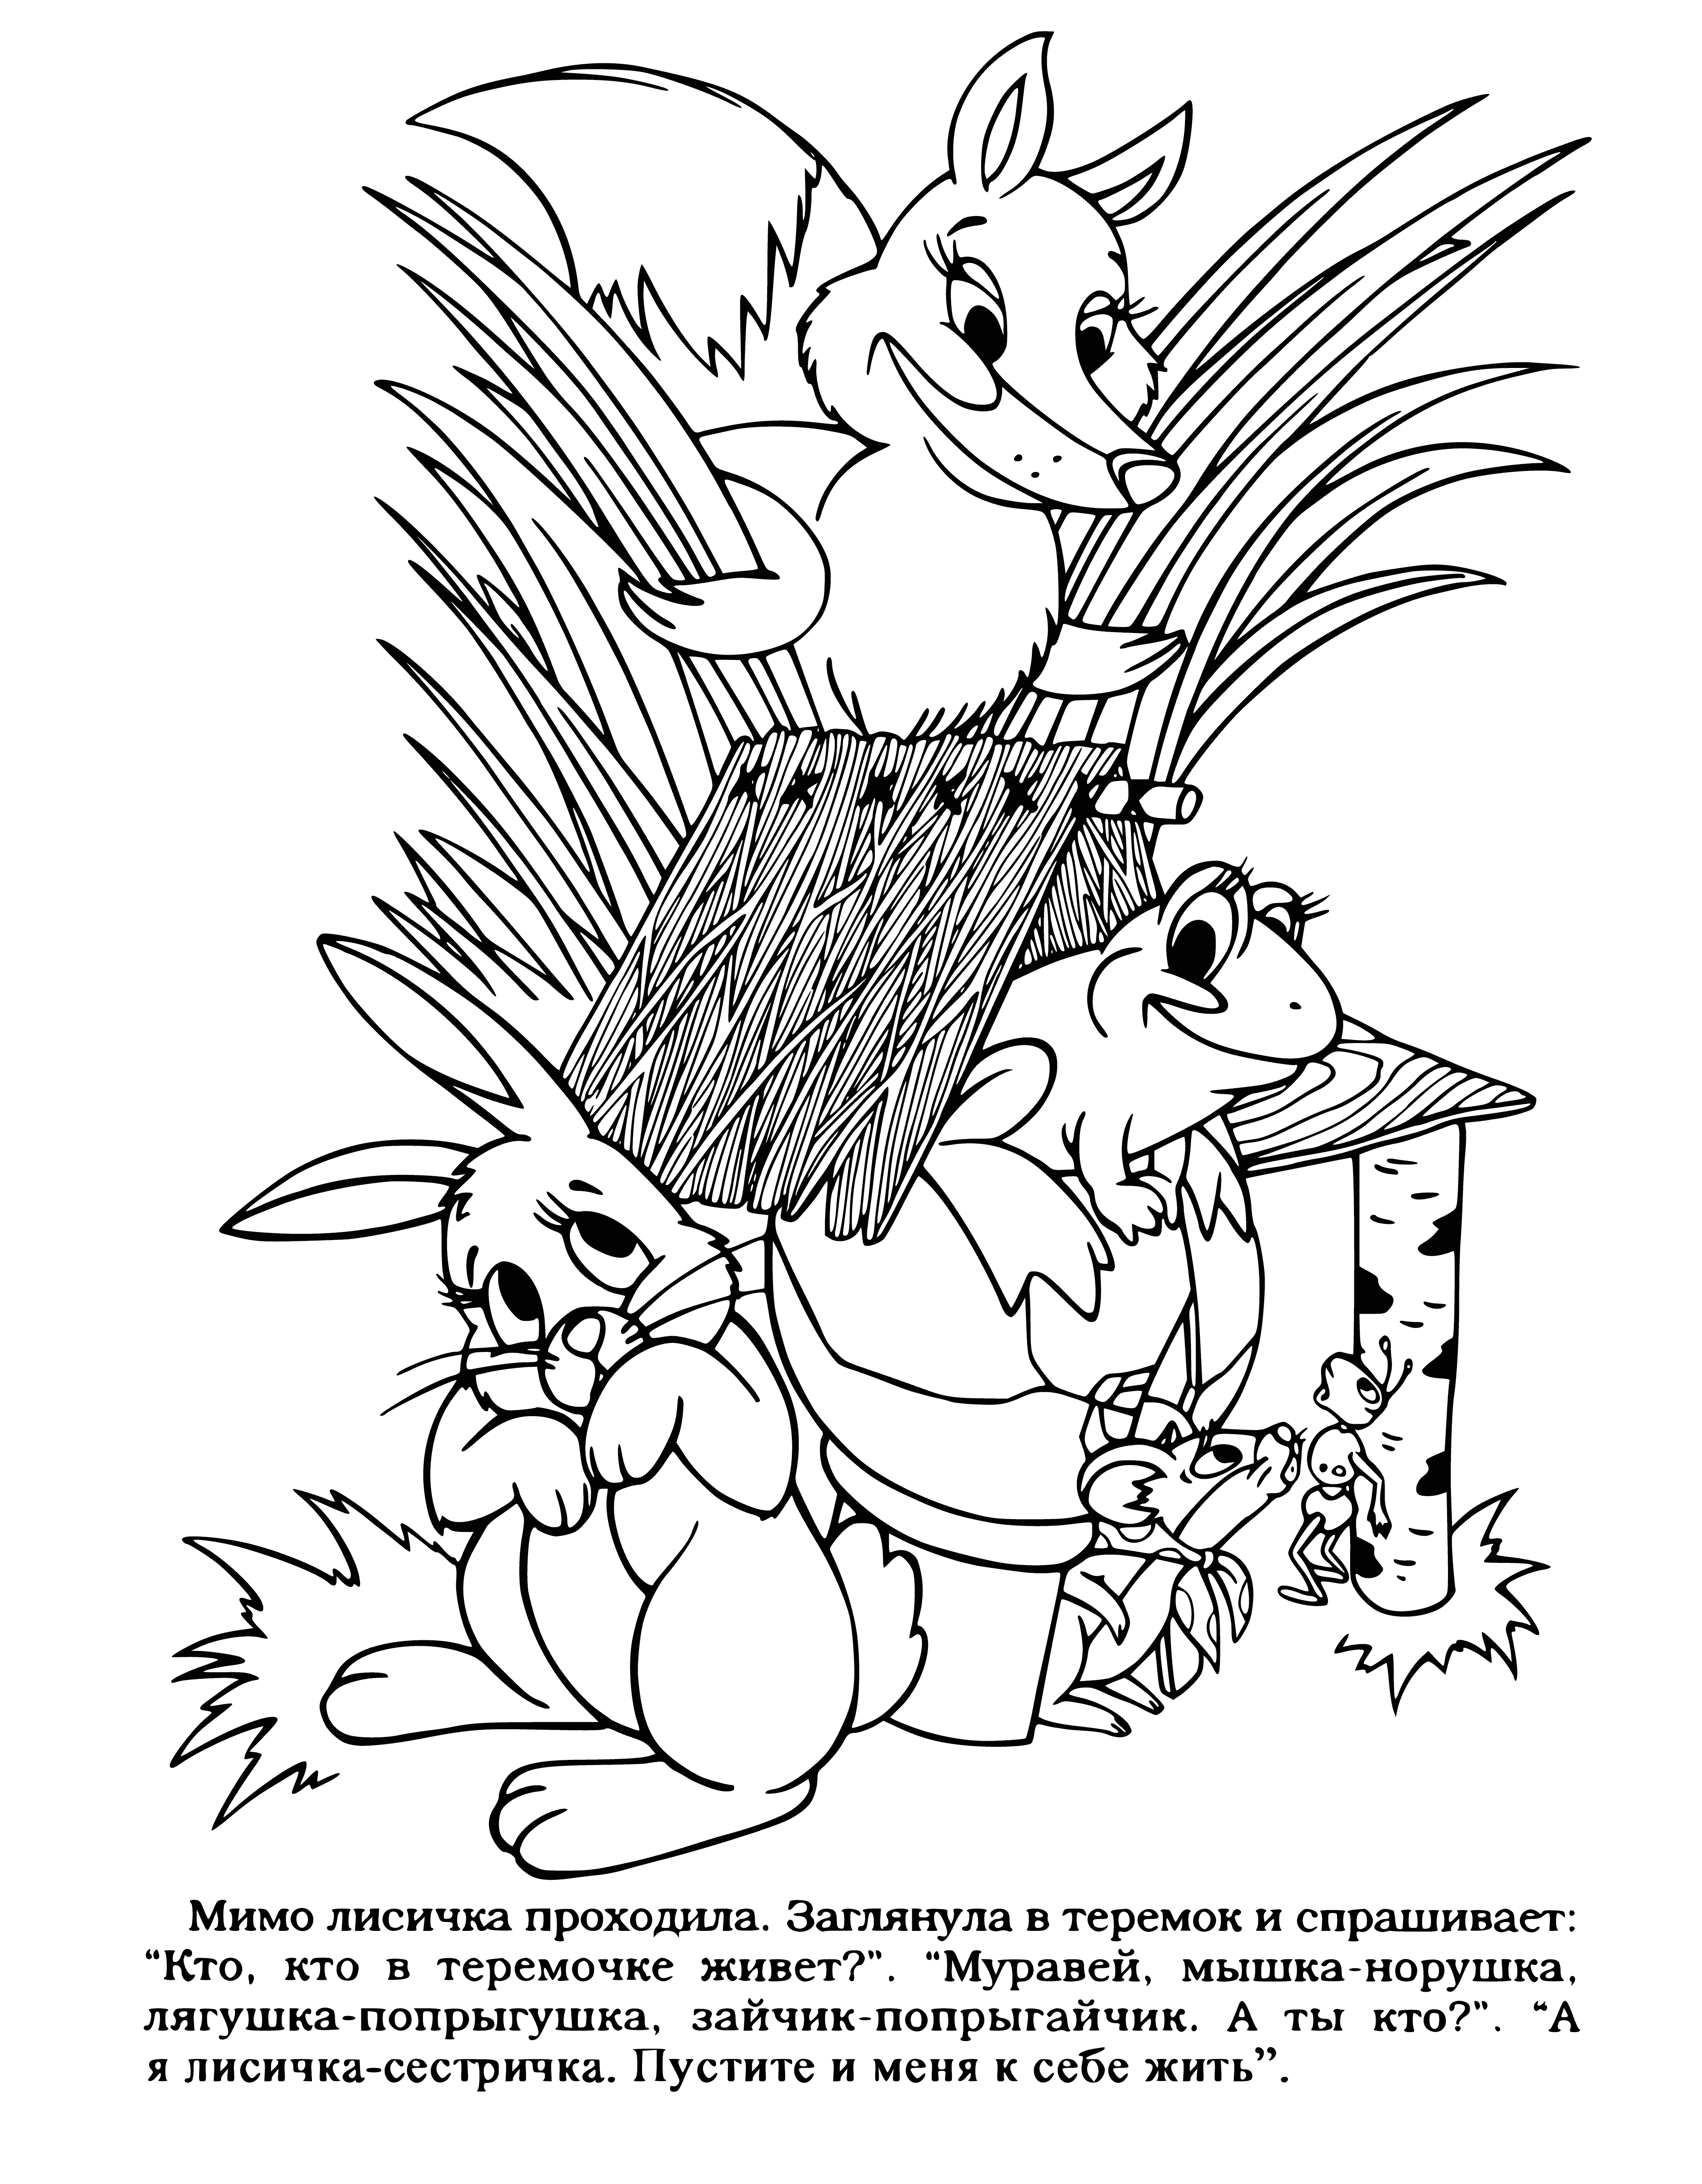 Fox-sister coloring page